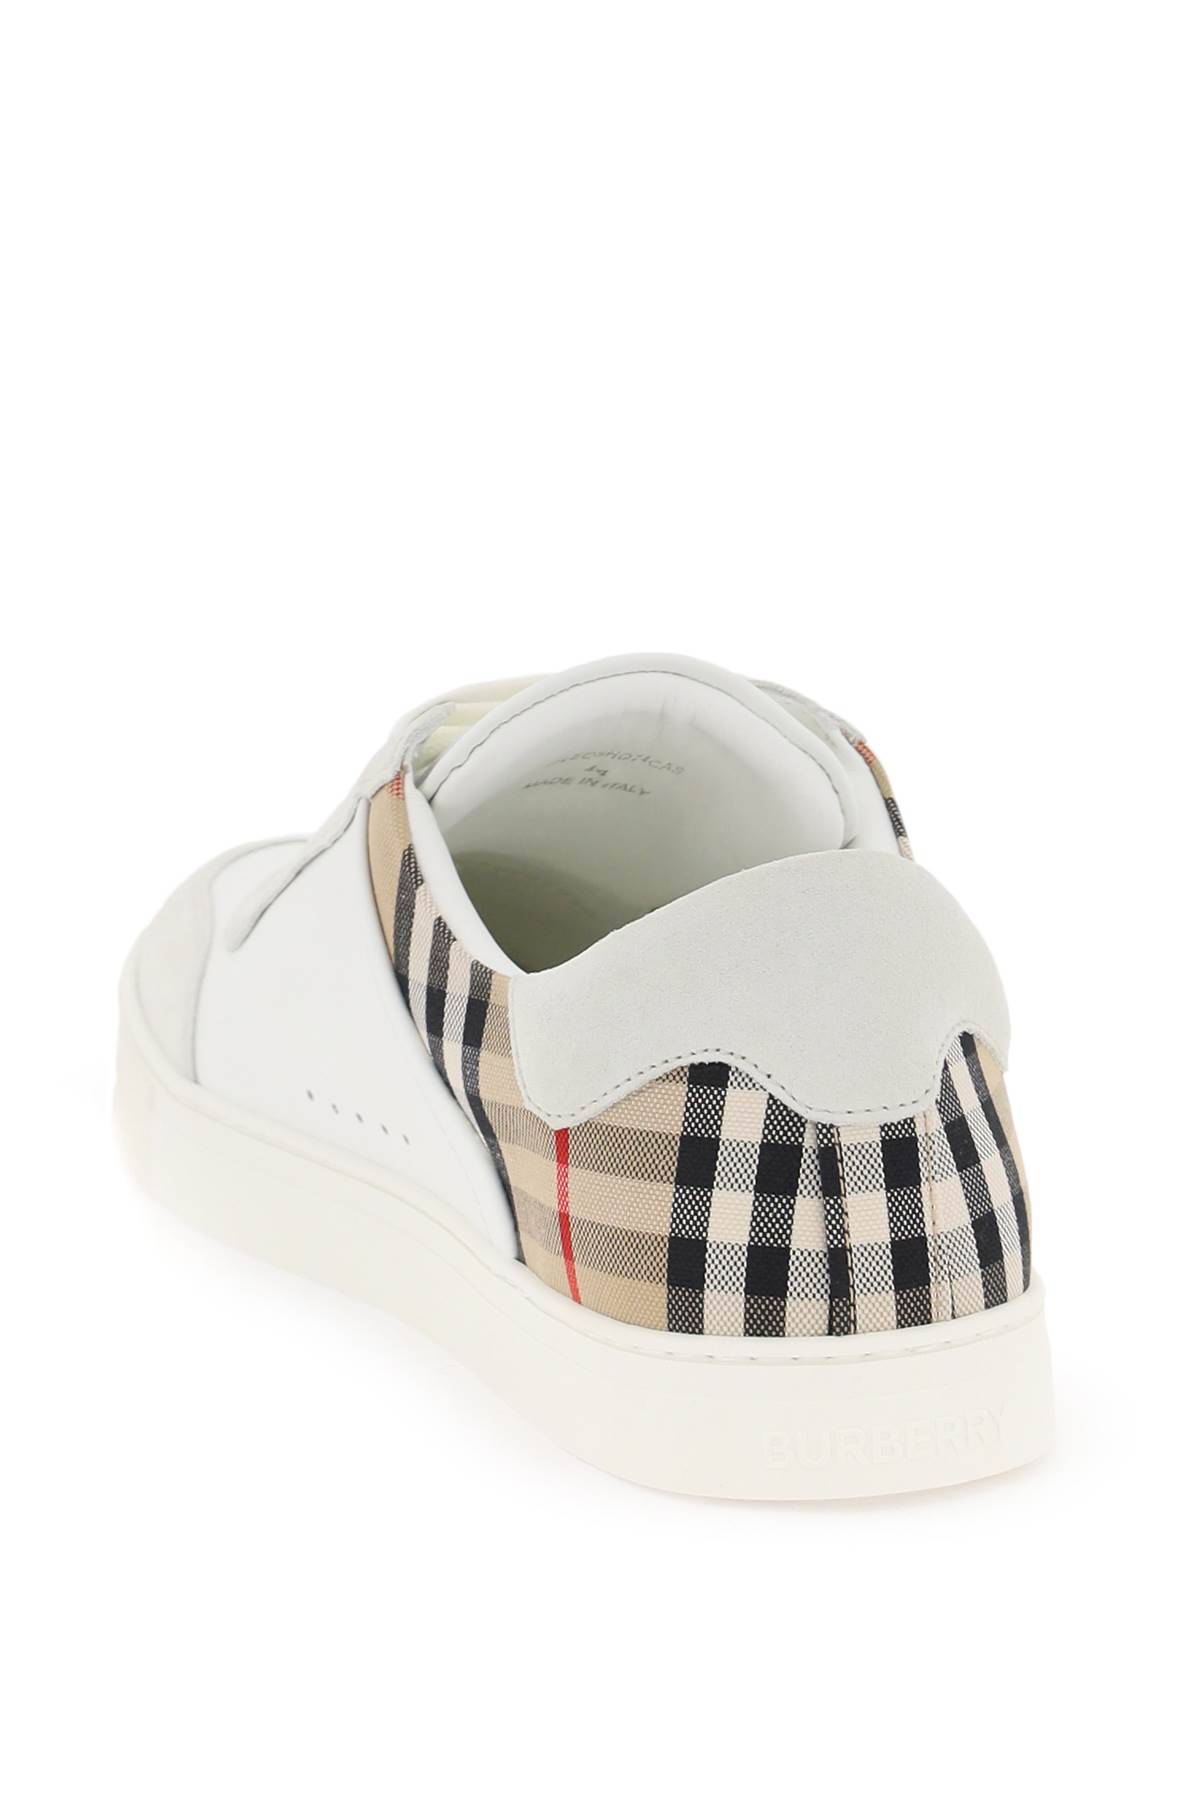 Shop Burberry Check Leather Sneakers In White,beige